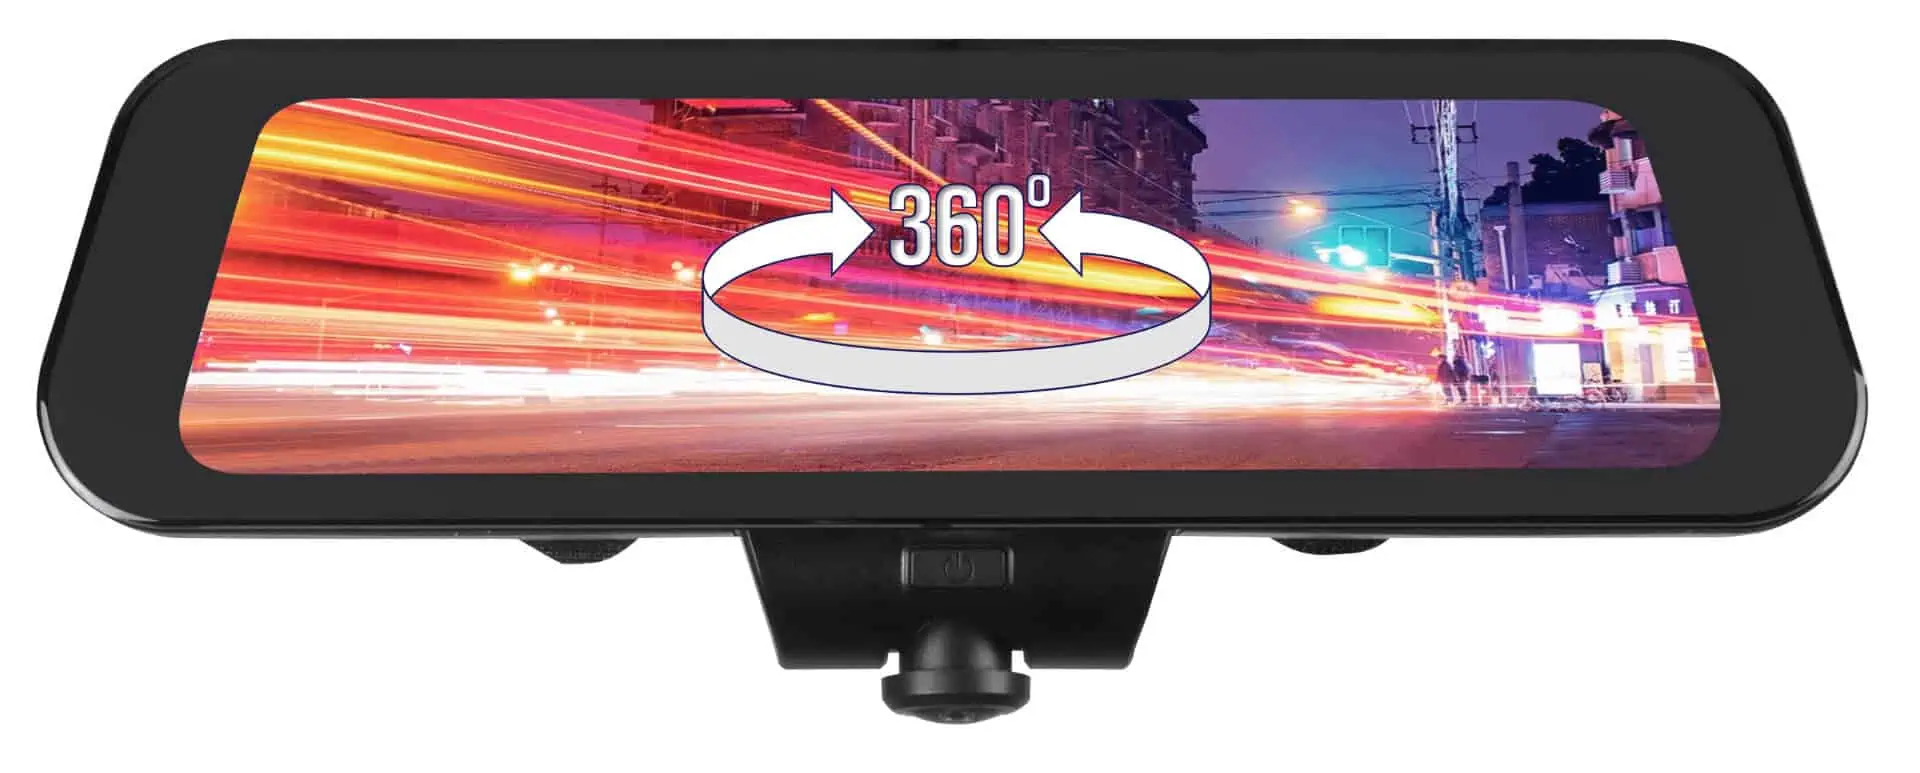 360 View Rearview Camera